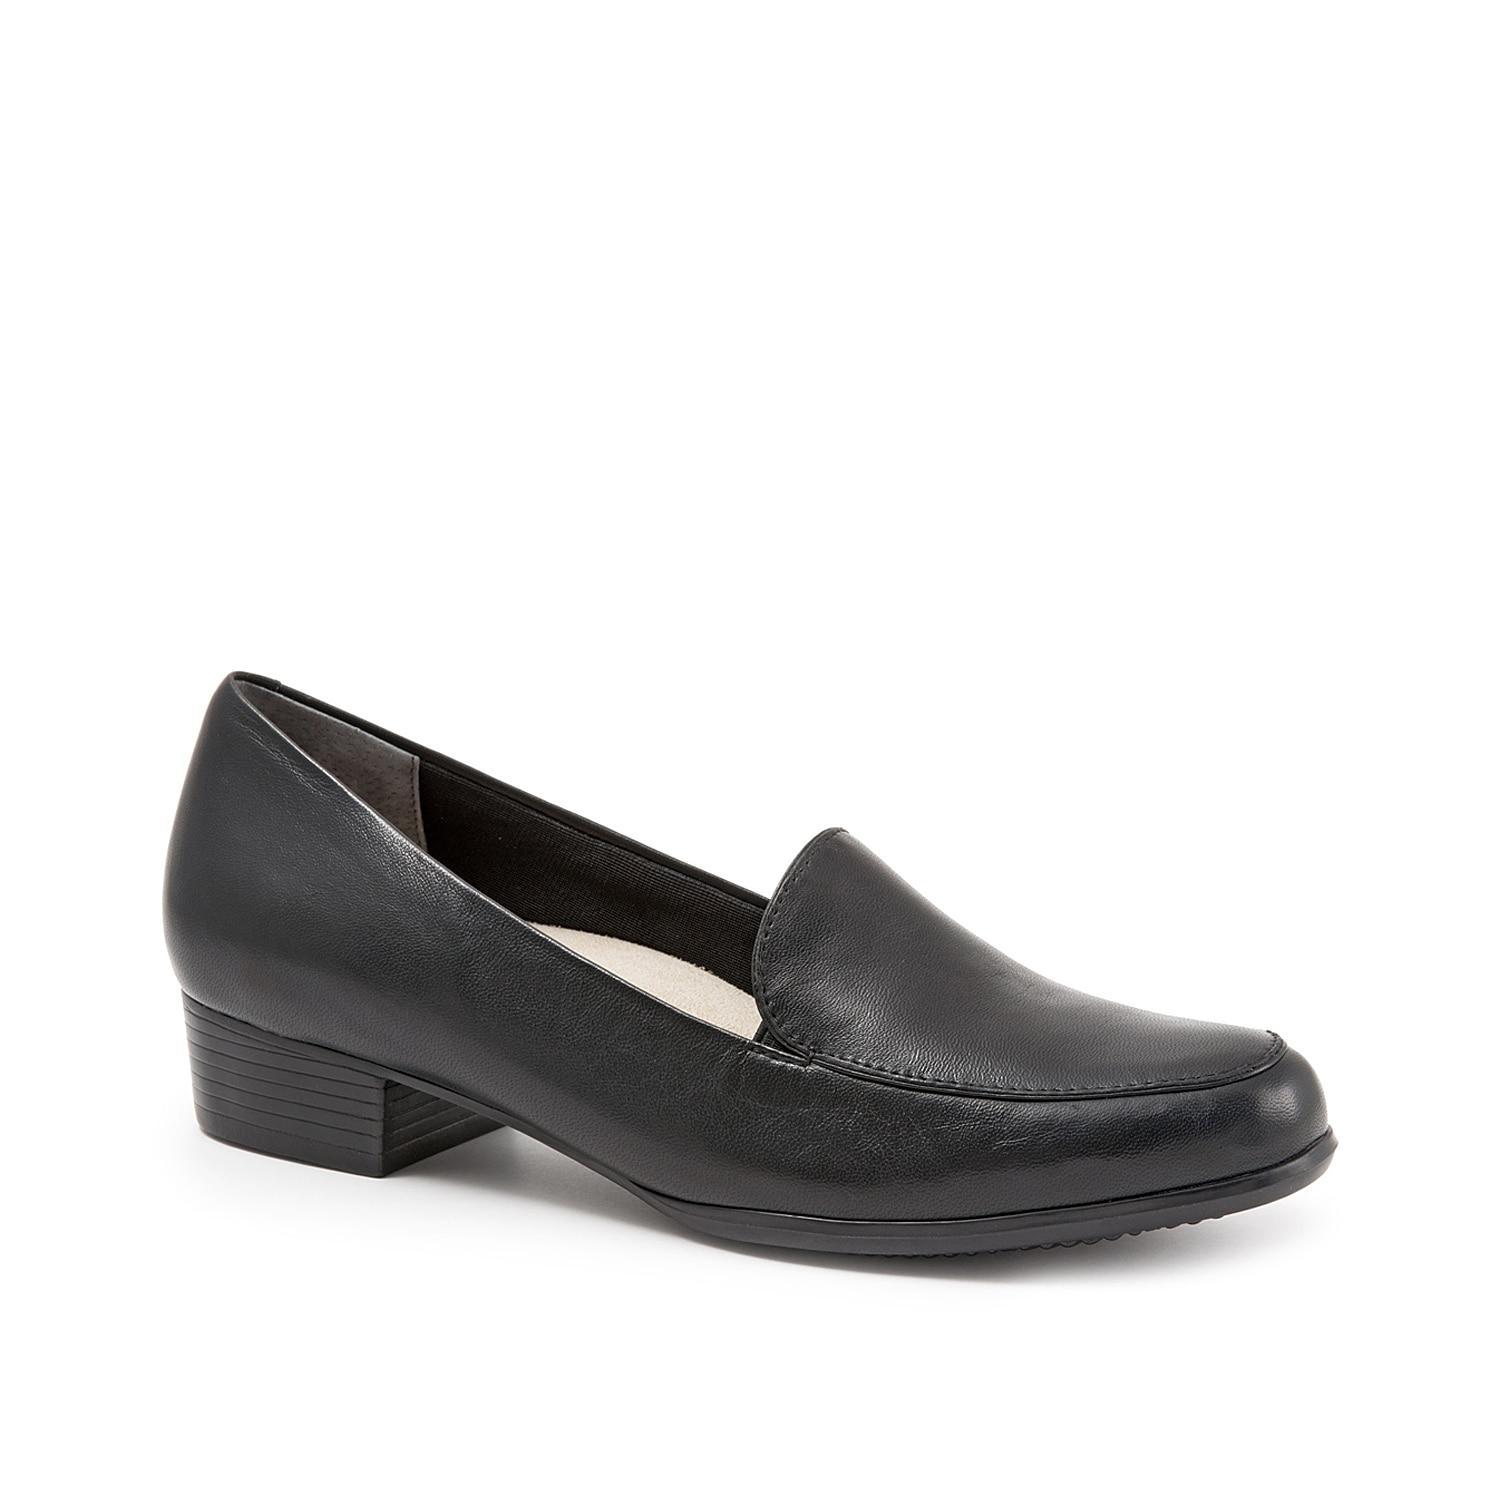 Trotters Monarch Leather Slip-On Block Heel Loafers Product Image